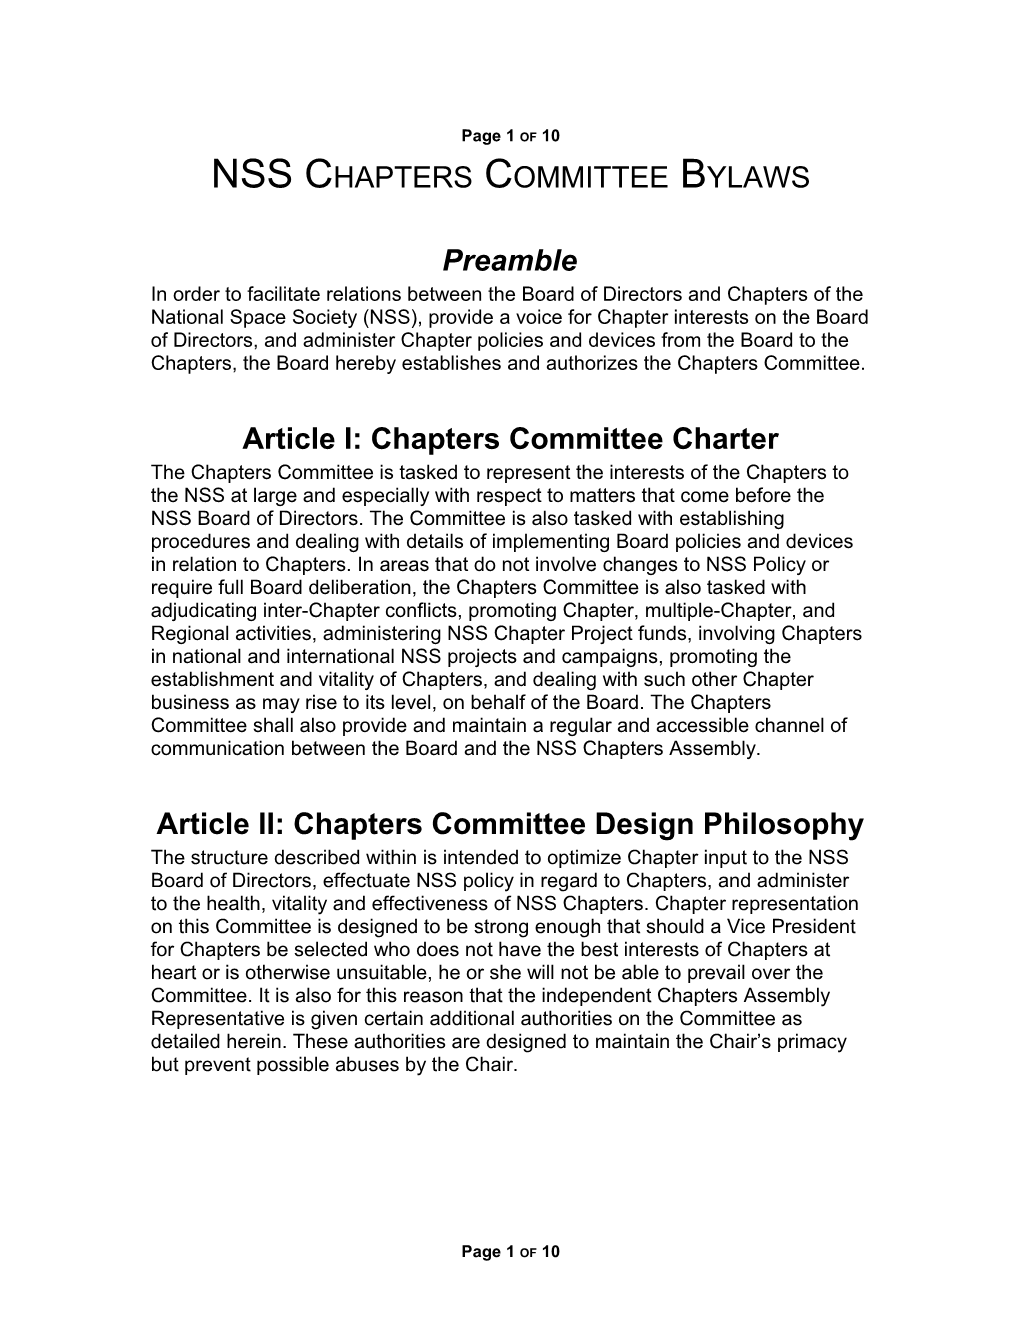 NSS Chapters Committee Bylaws